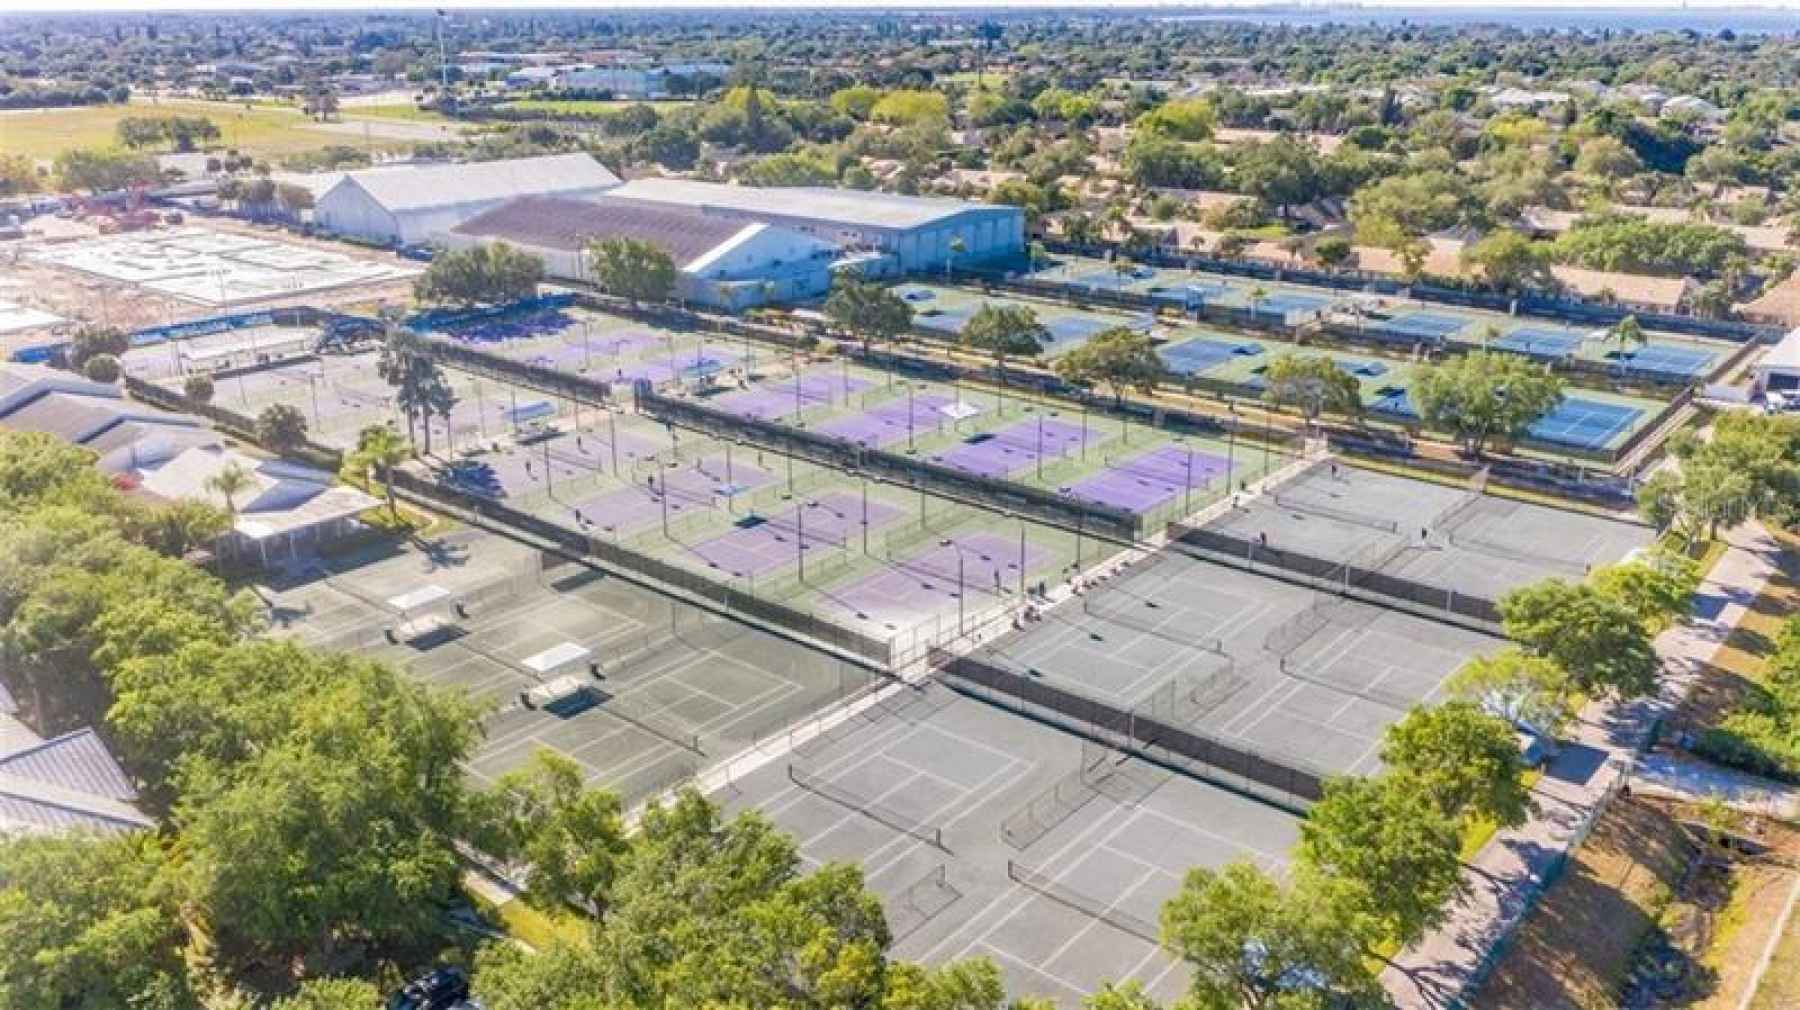 Tennis Courts at IMG, and new Basketball arena to completed soon